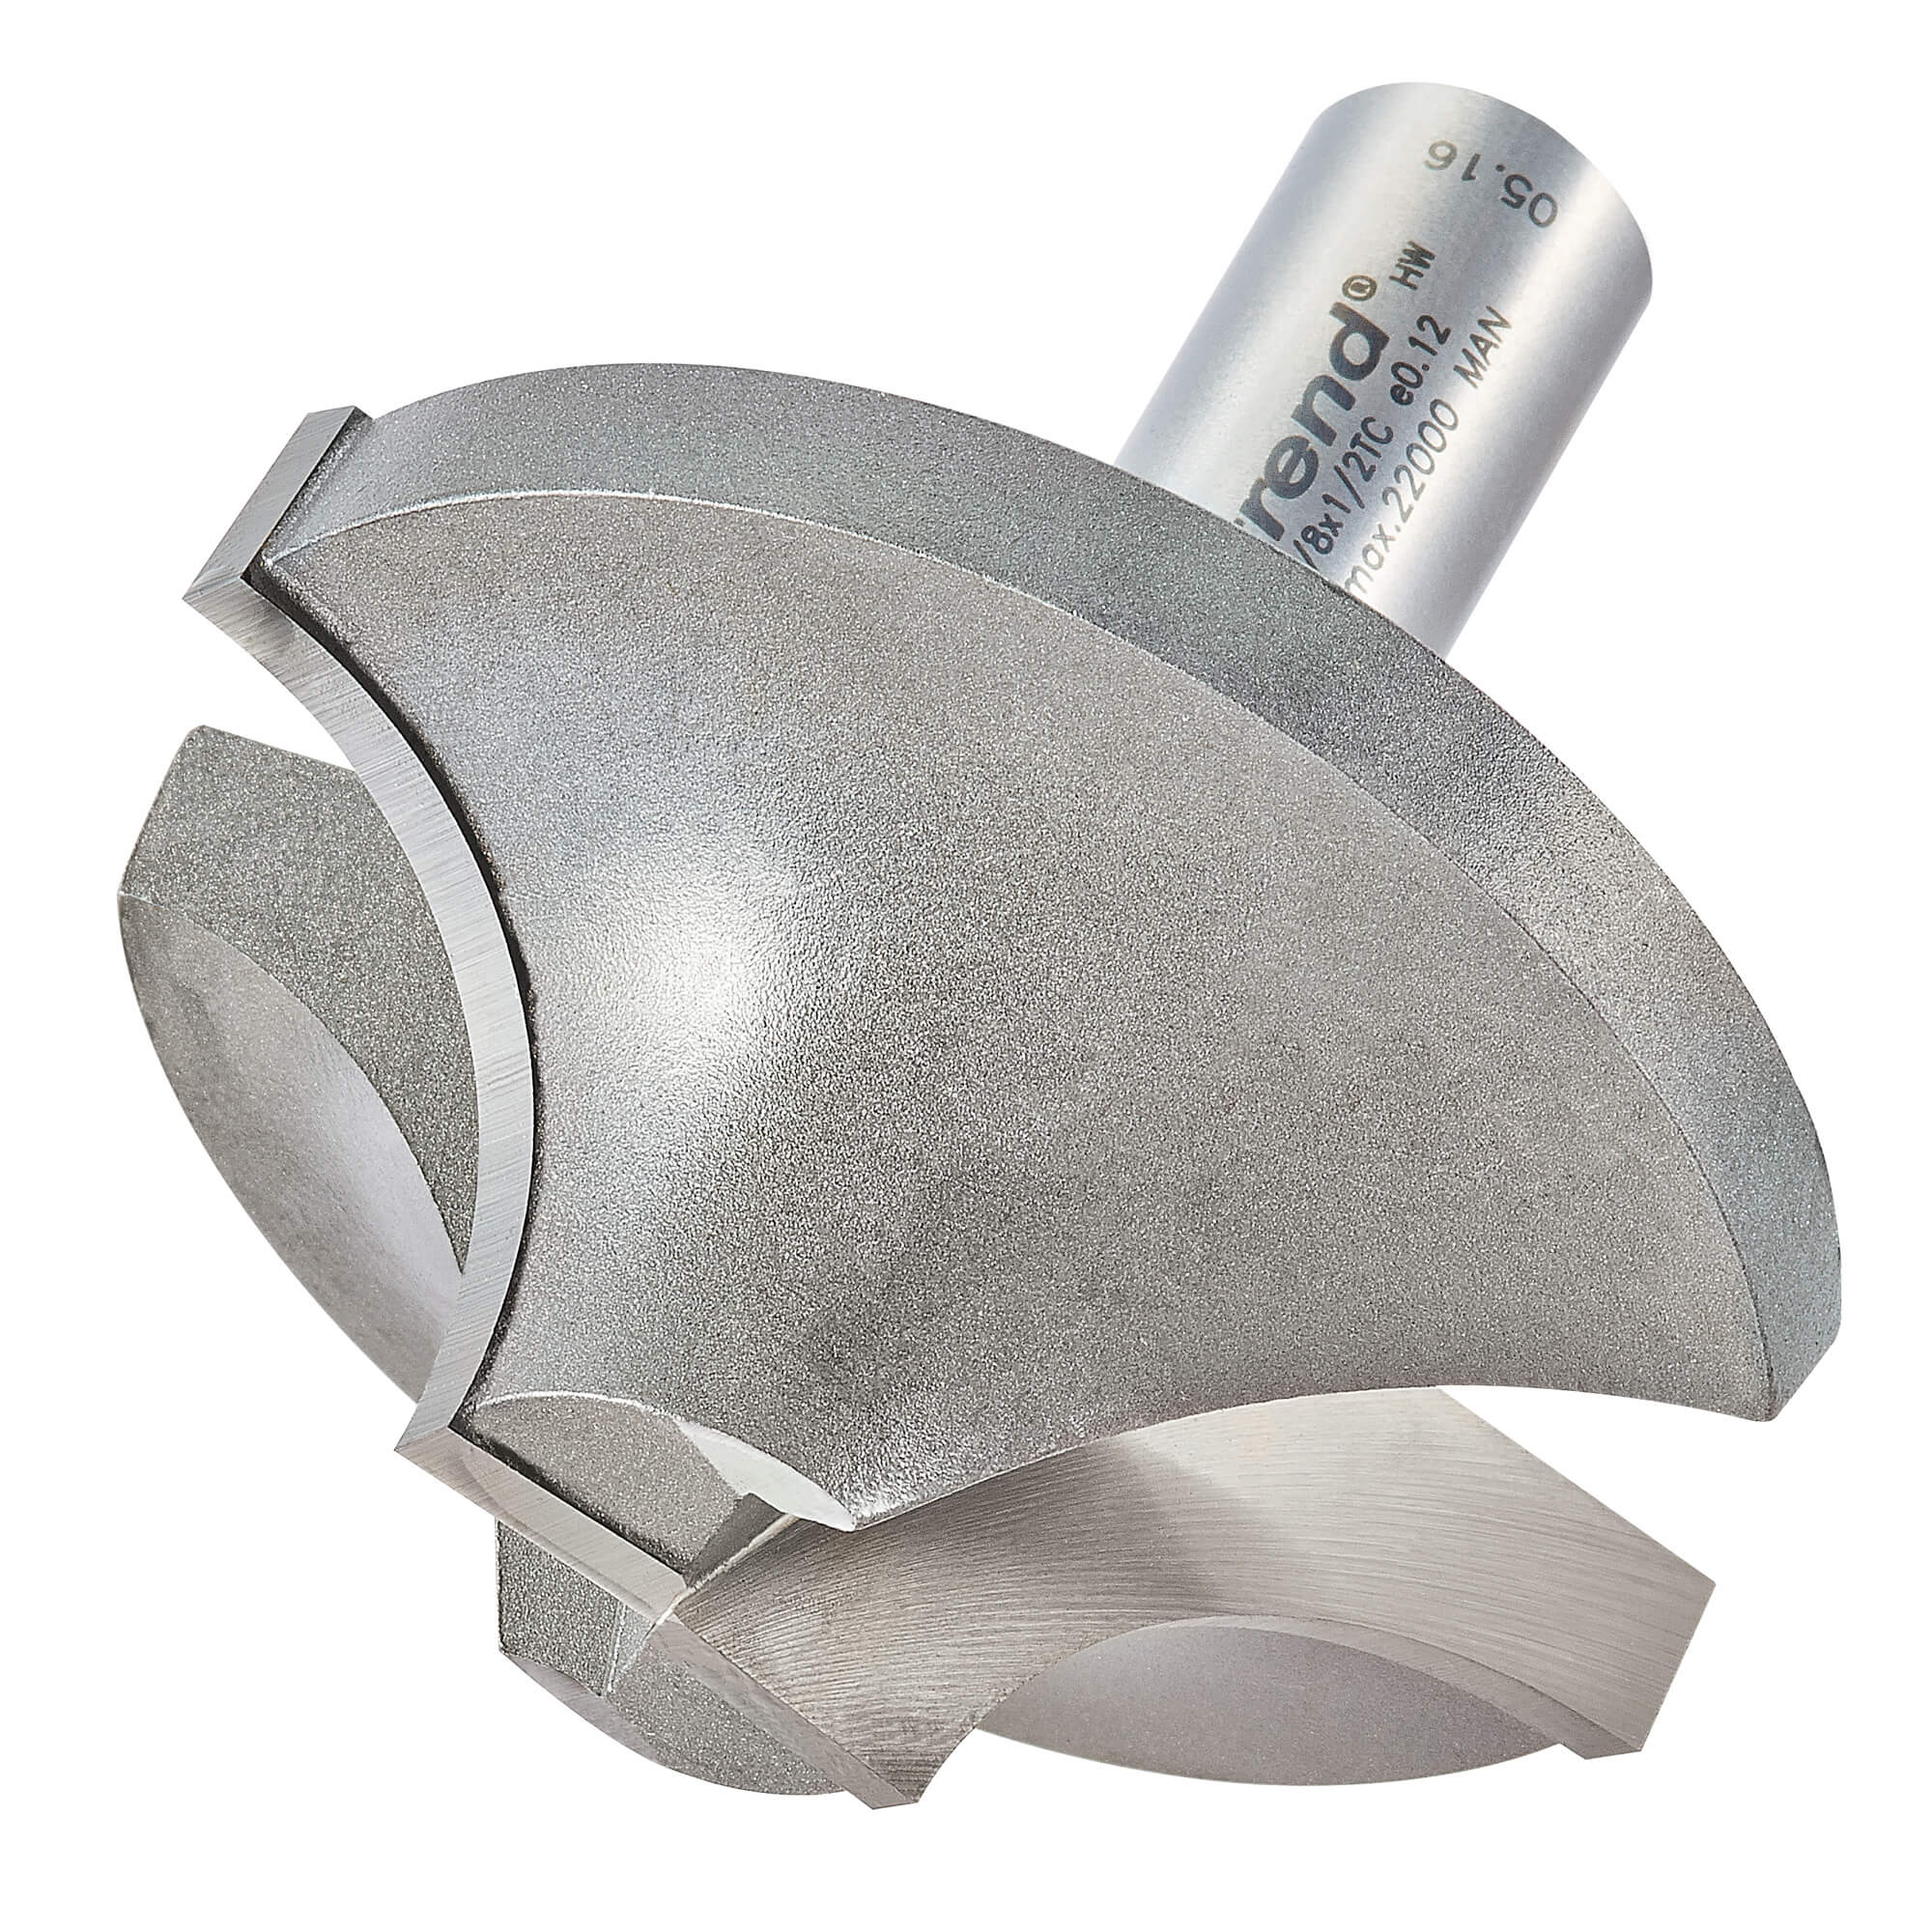 Image of Trend Ovolo Rounding Over Router Cutter 60mm 27mm 1/2"